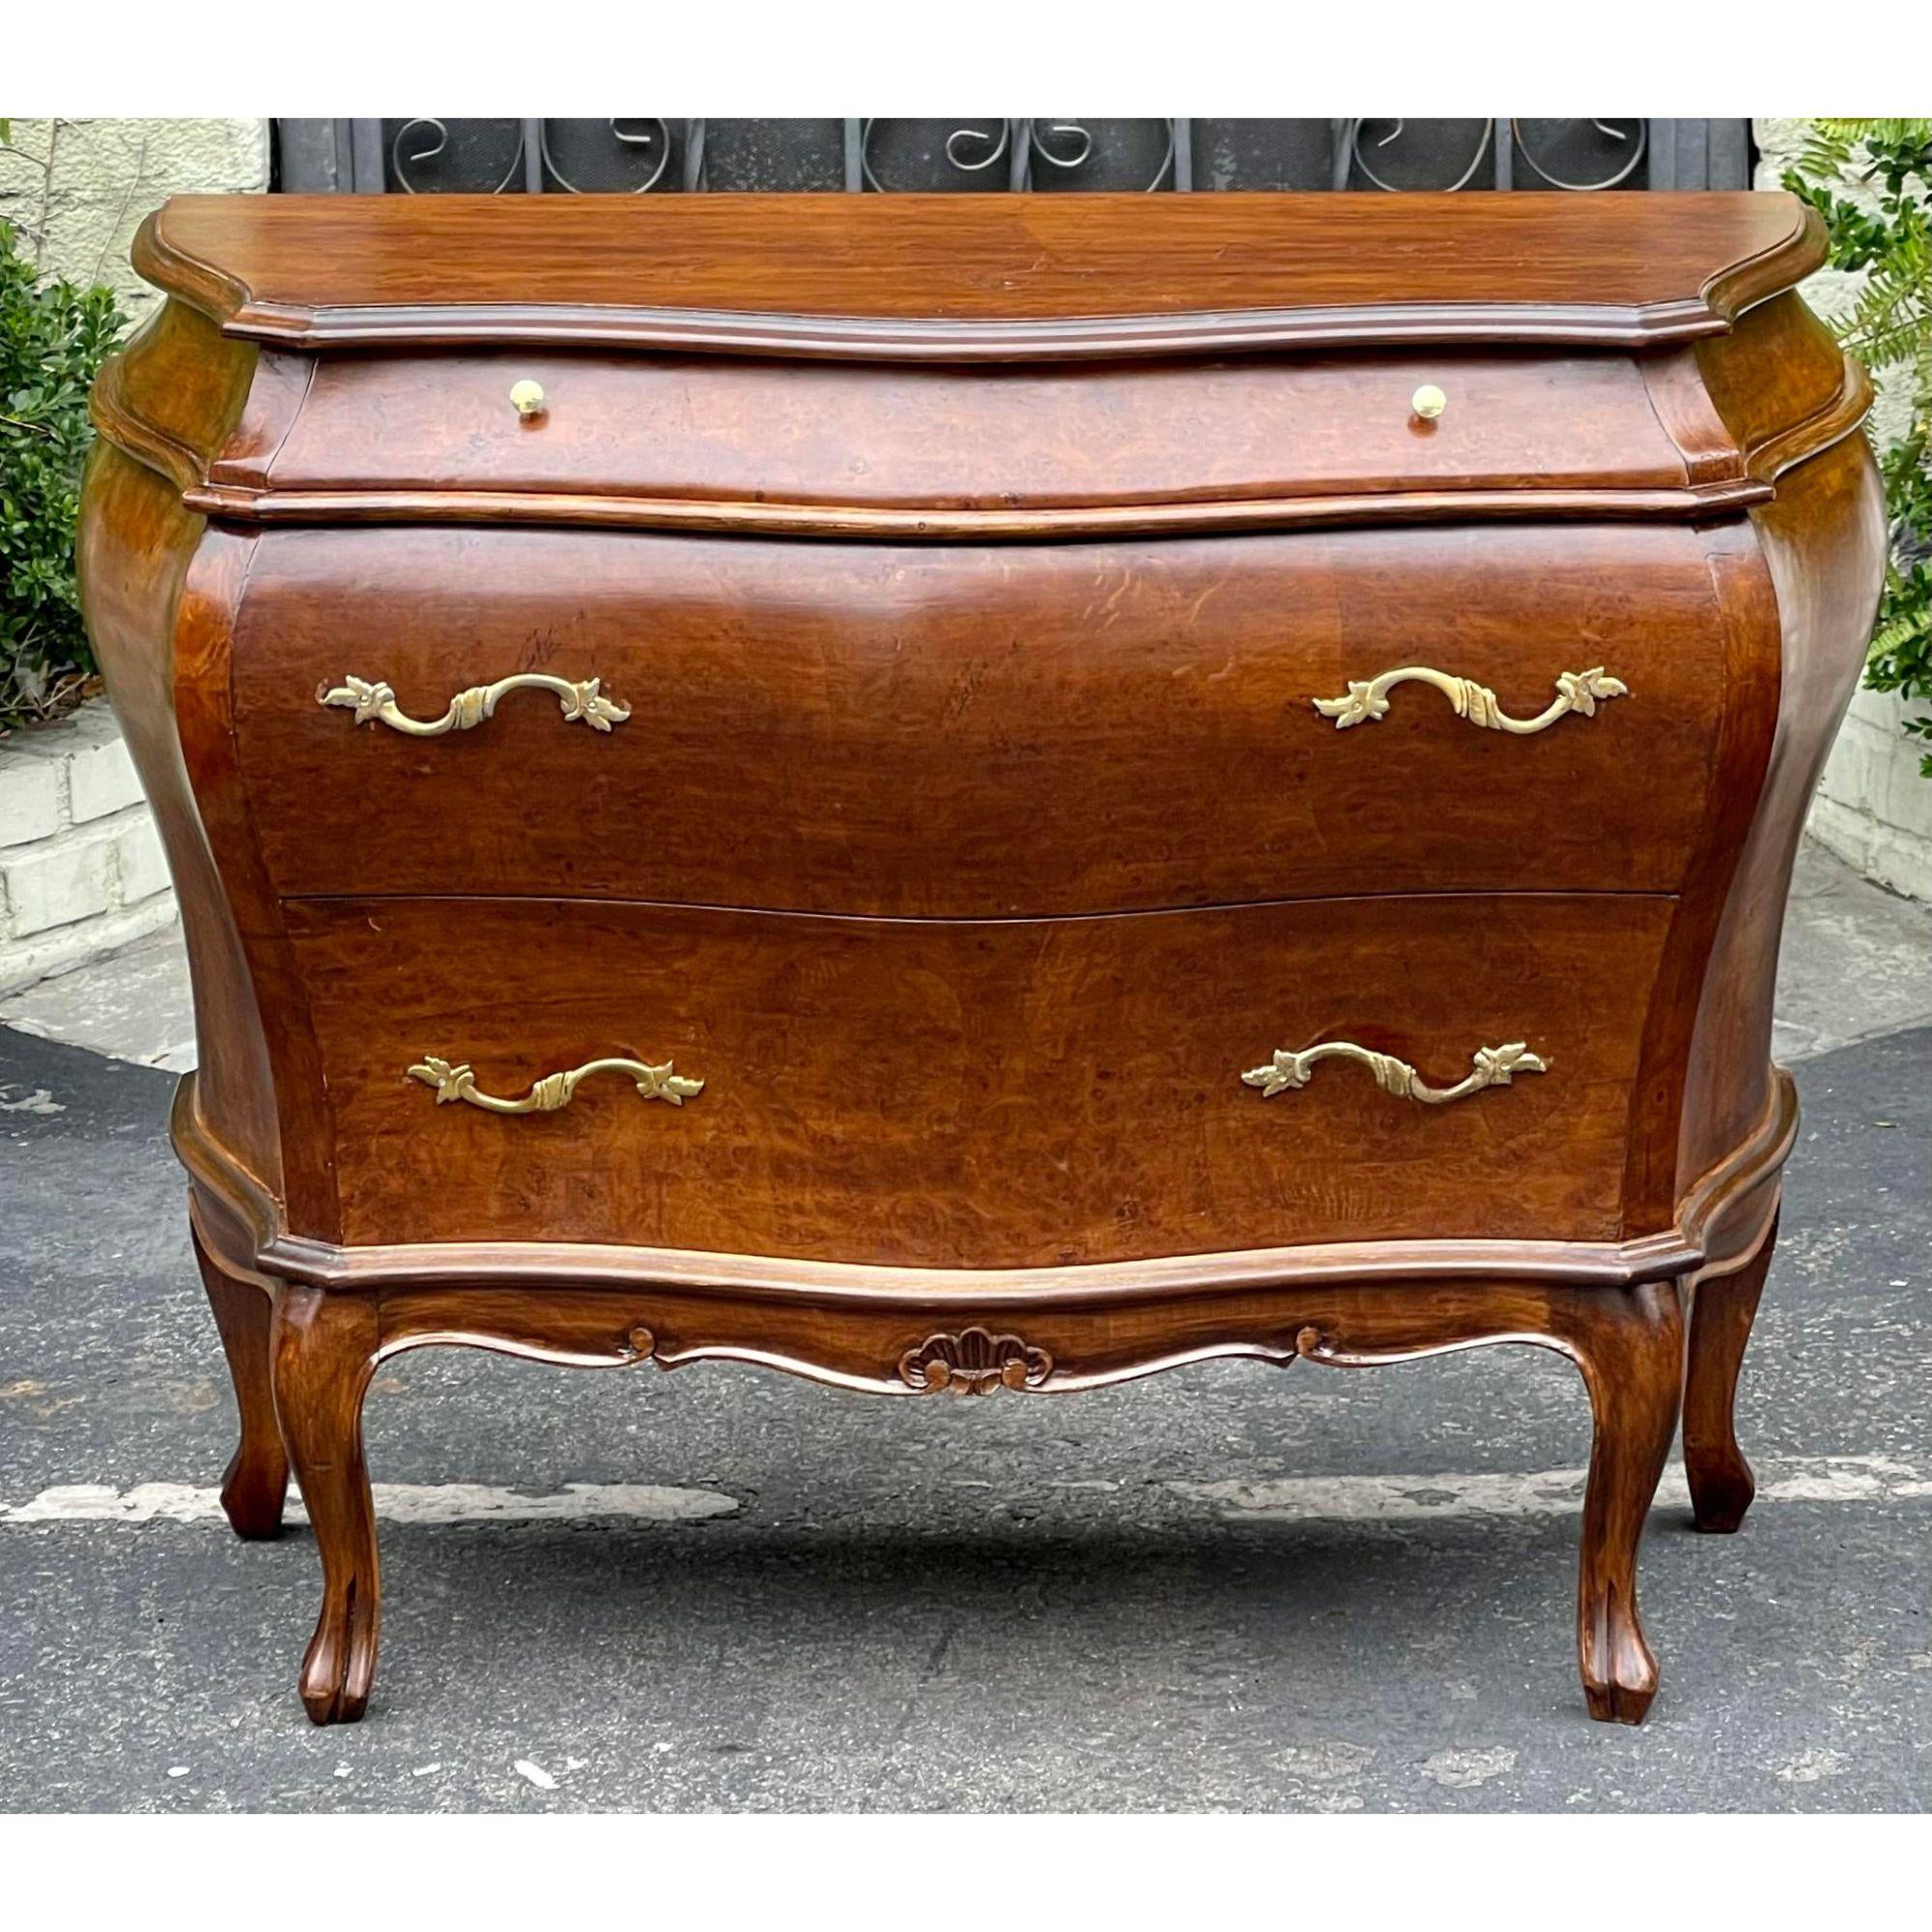 19th C, Style Italian Bombay Burl Walnut Commode Night Stand End Table 1